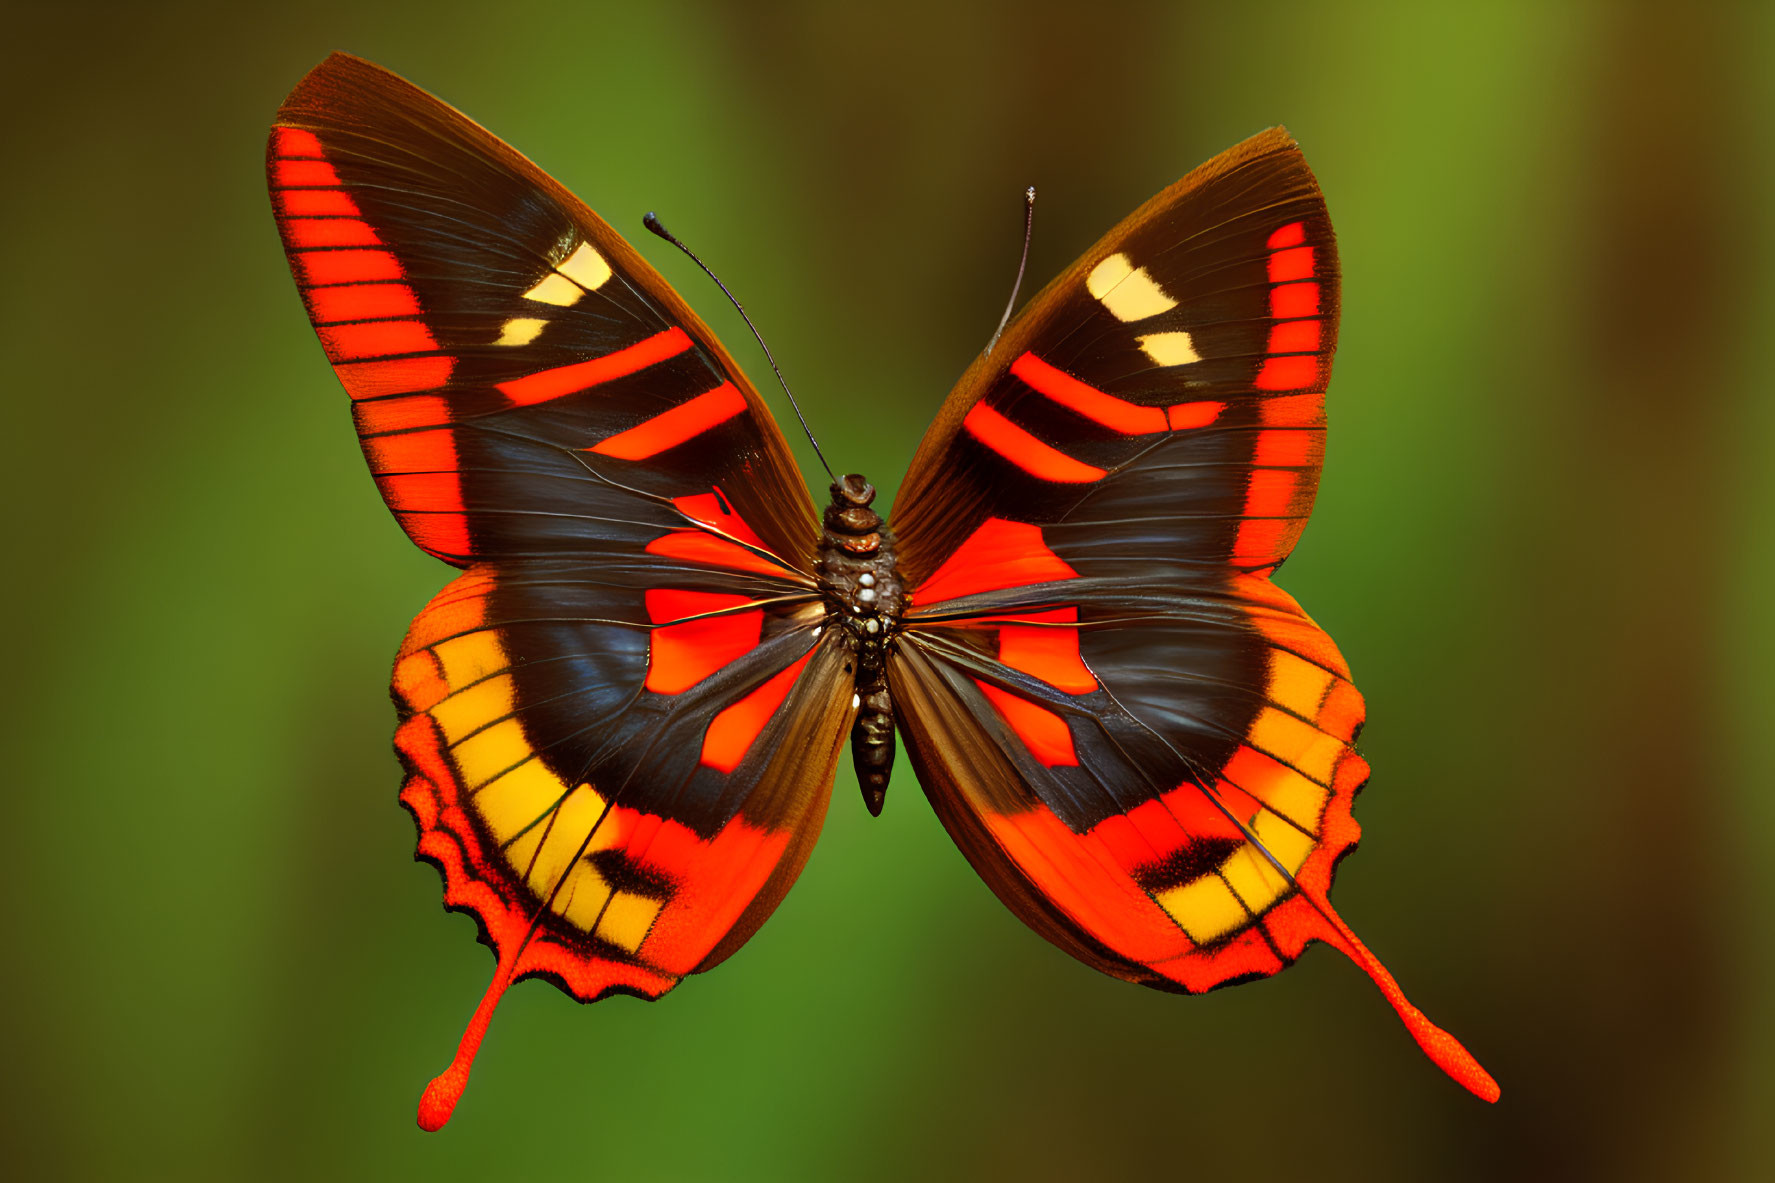 Colorful Butterfly with Striped Wings on Green Background